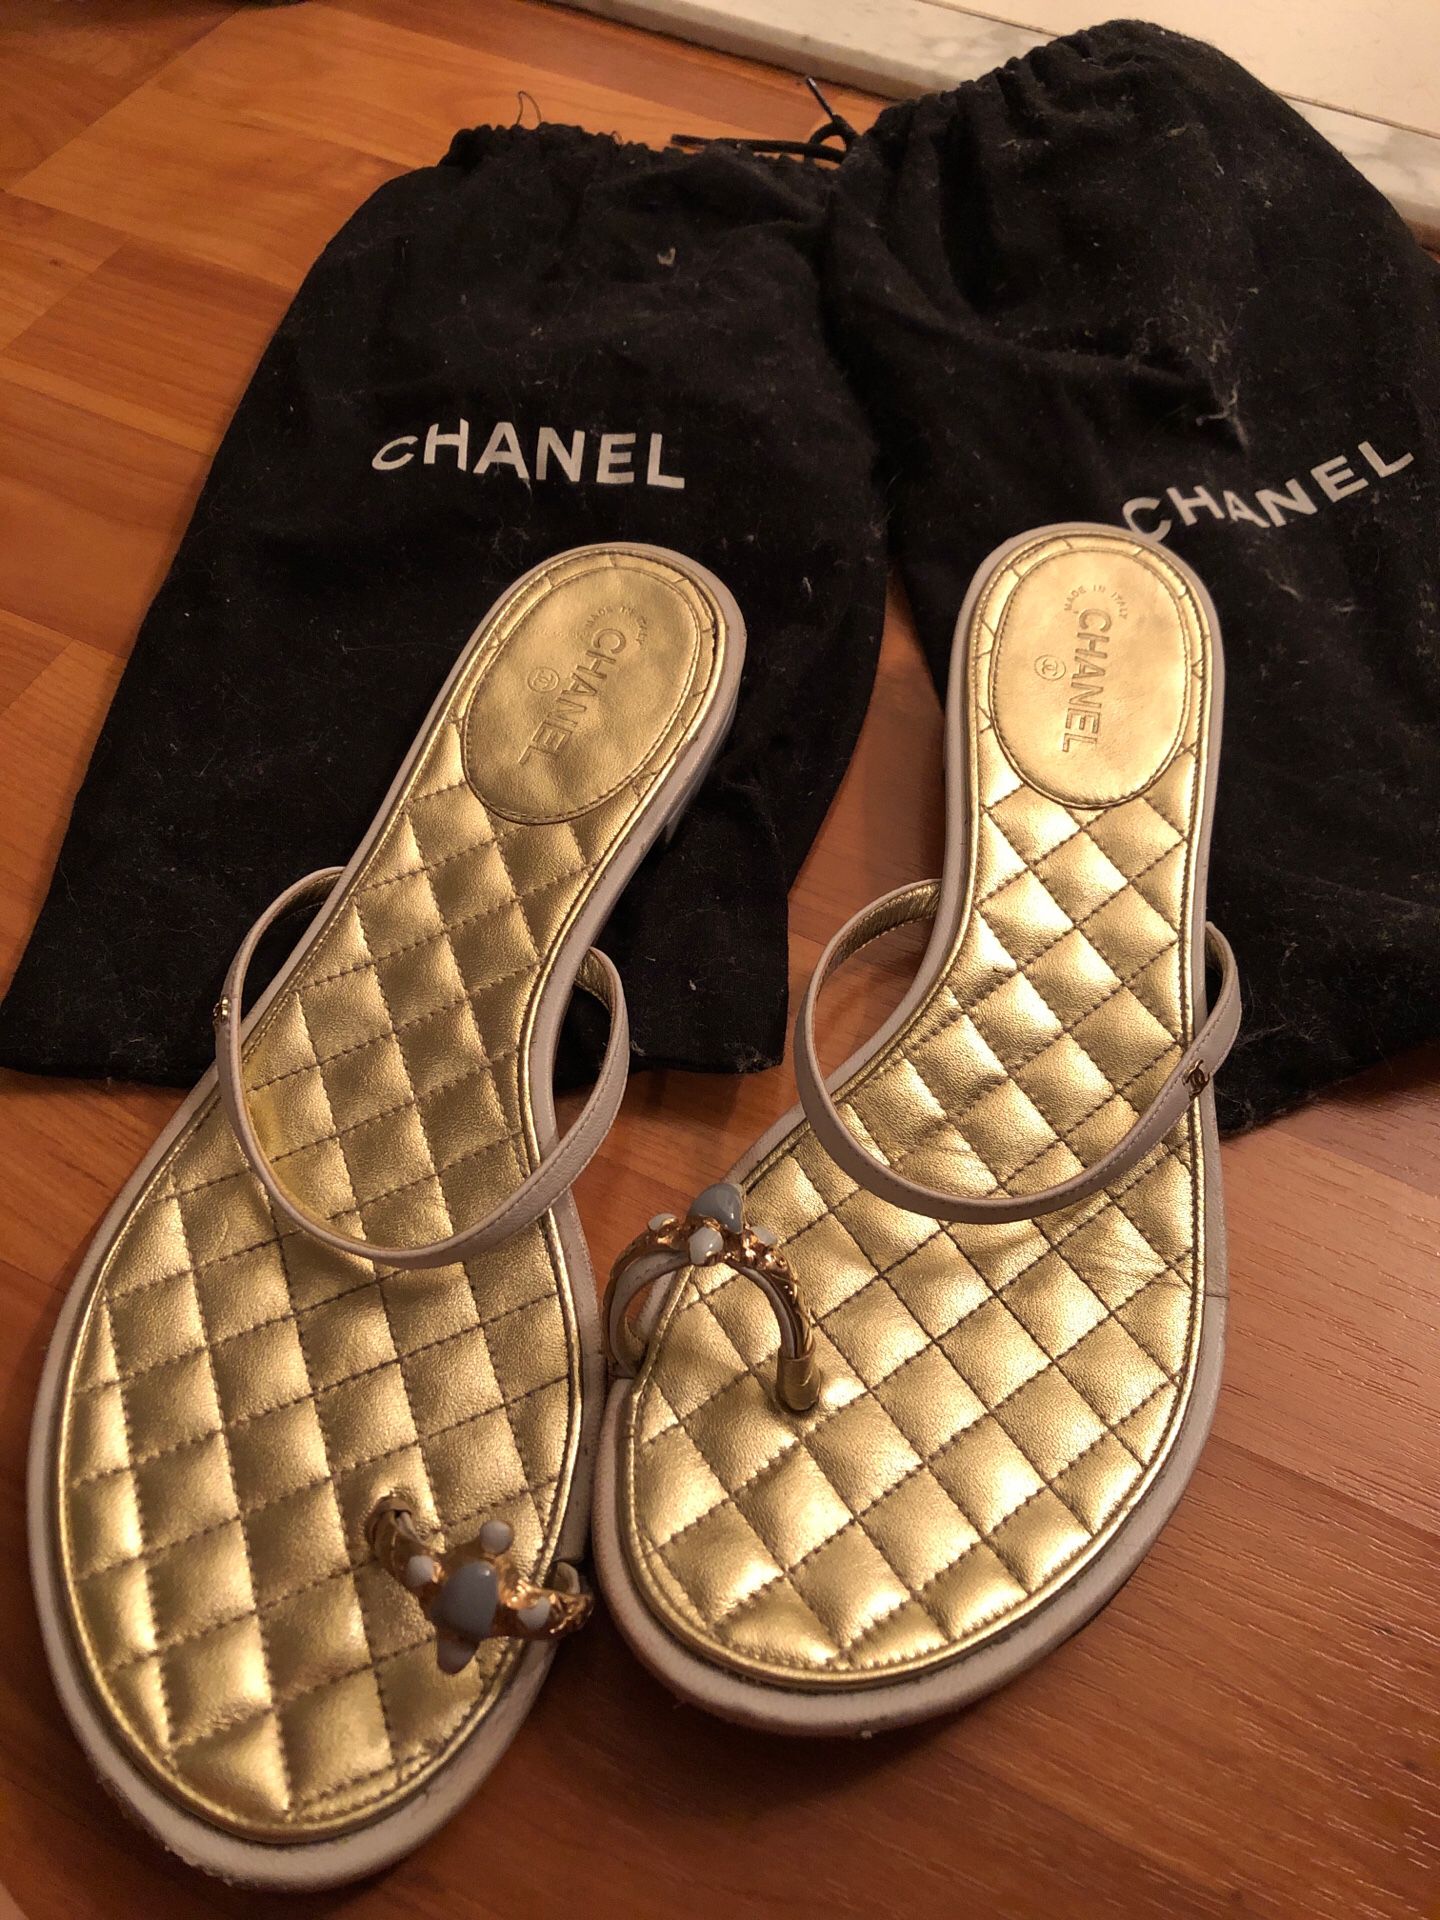 Chanel sandals for Sale in Miami, FL - OfferUp